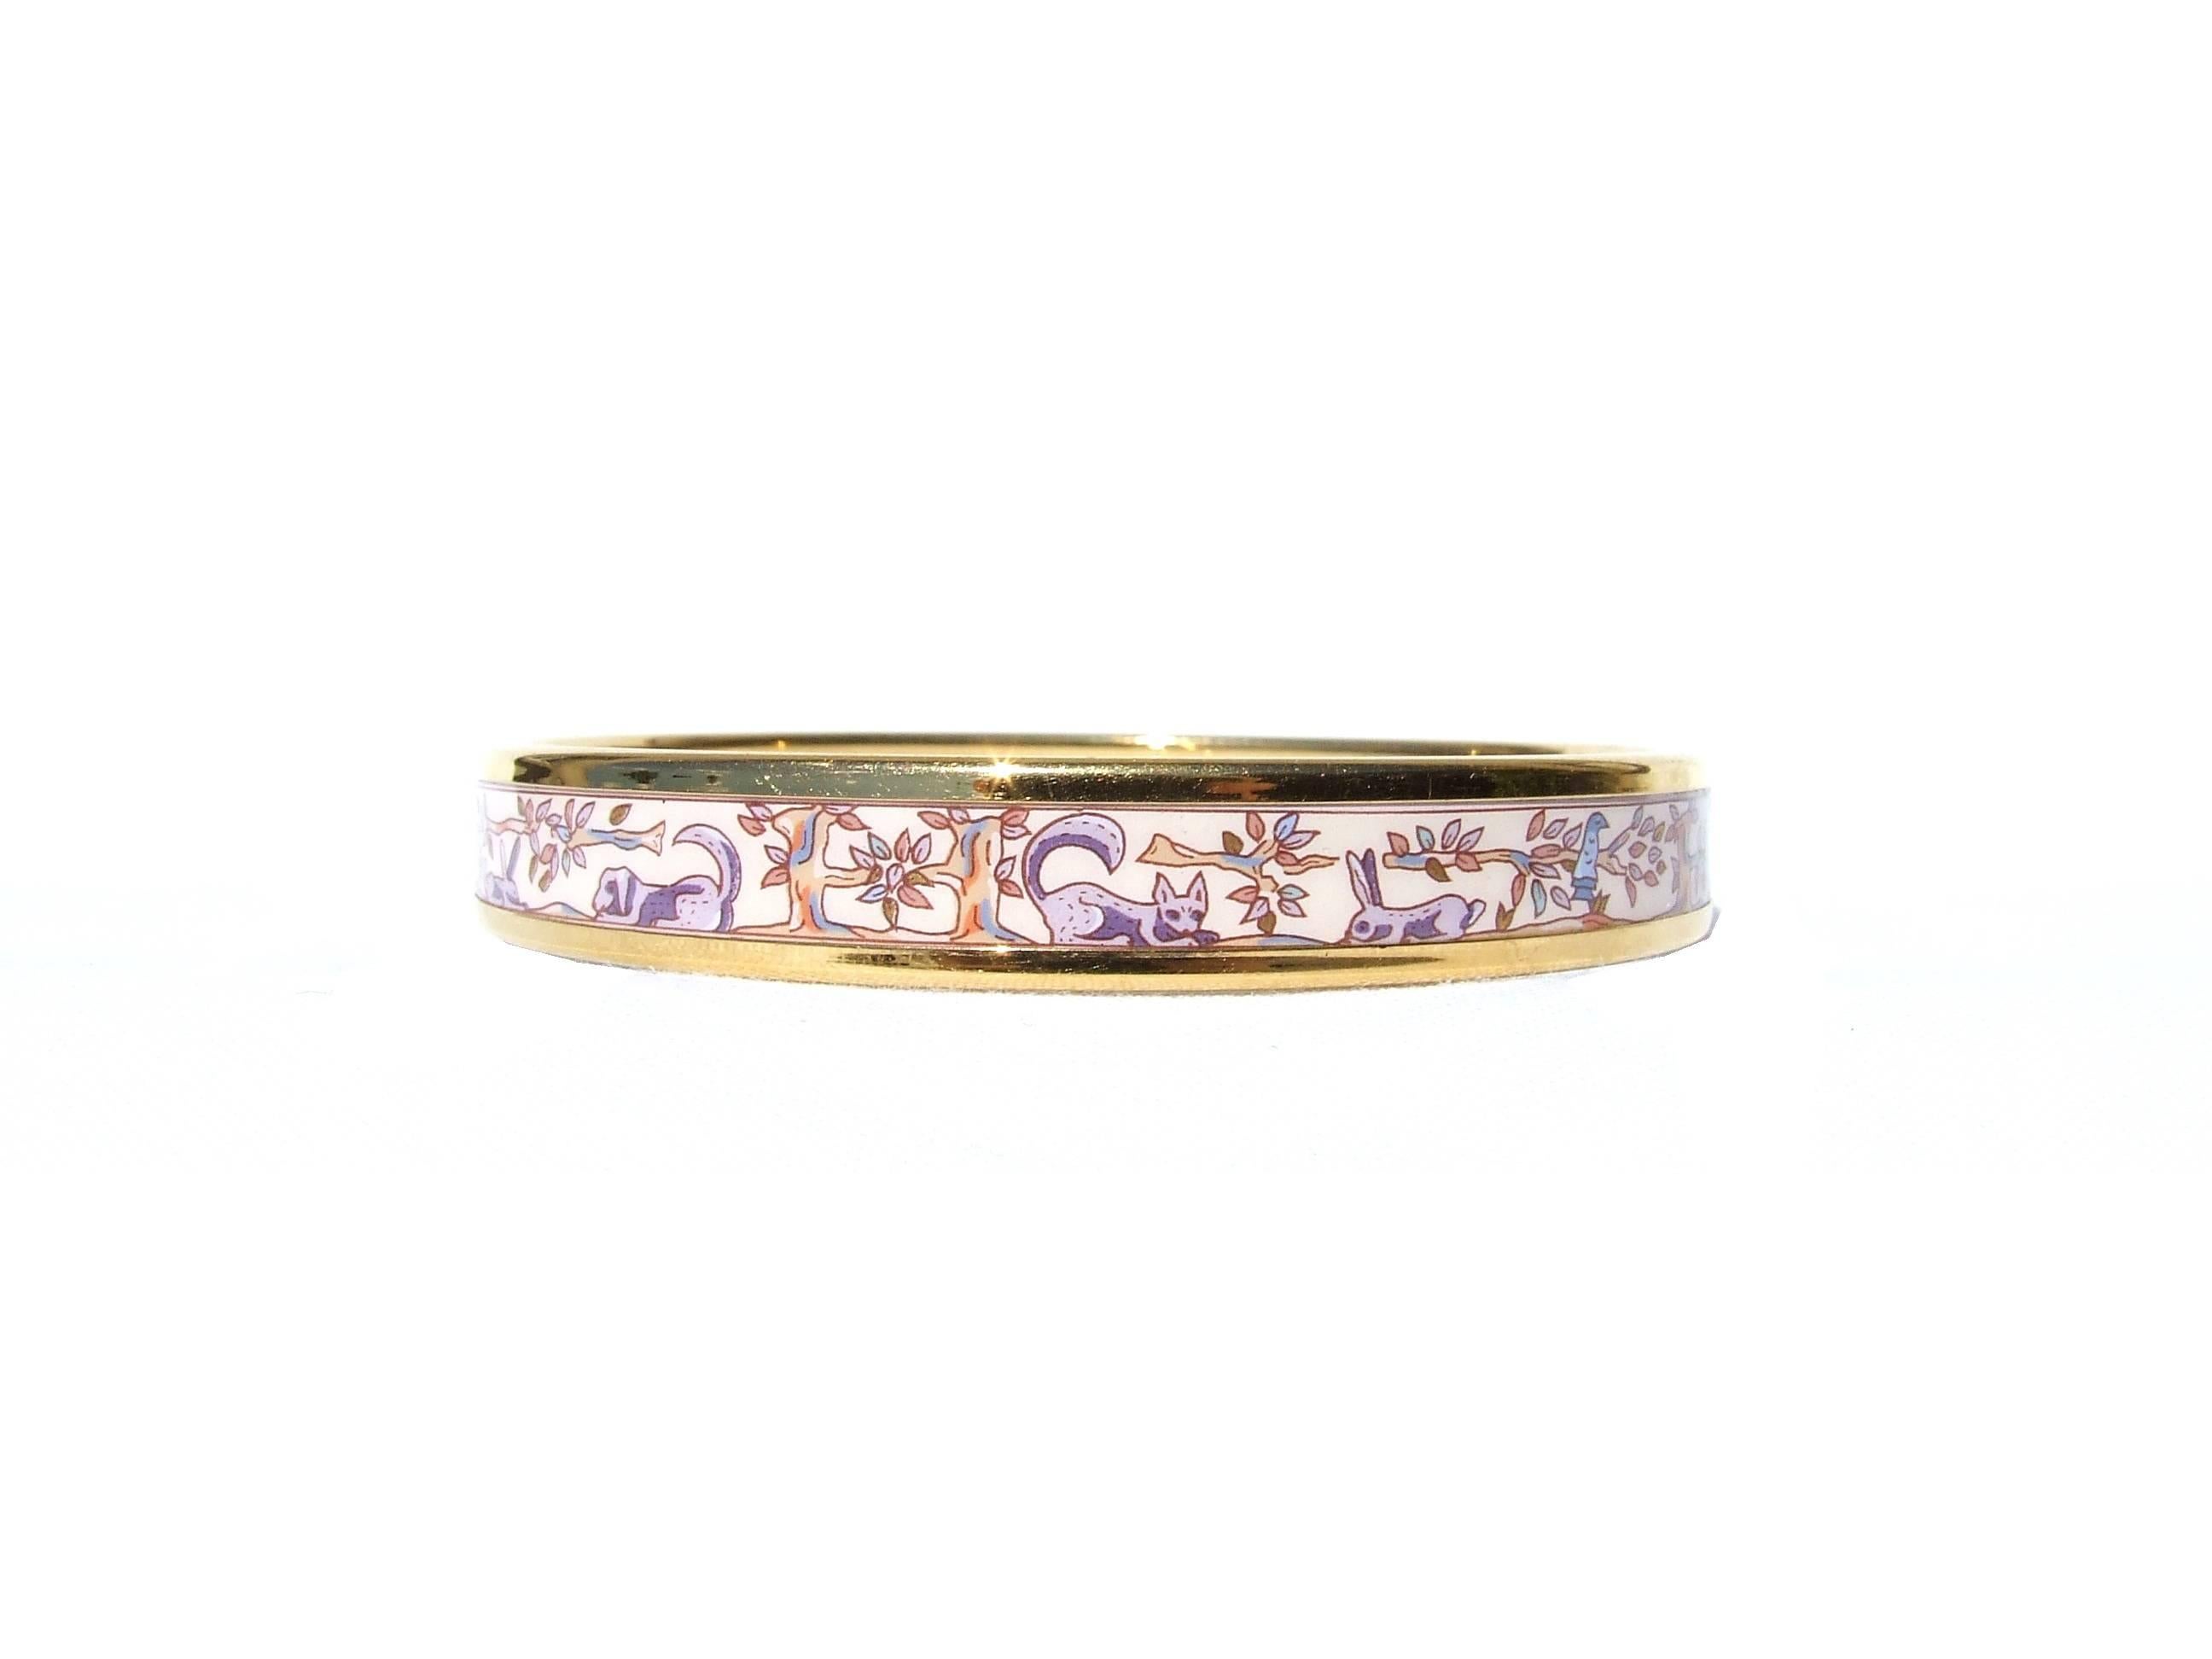 Beautiful Authentic Hermes Bracelet

Pattern: Cats, Dogs, Rabbits, Birds, Trees drawing an H

Made in Austria + F

Made of Enamel and Gold plated Hardware

Colorways: To me background is pink, any will see it beige I think. Drawings in purple, blue,